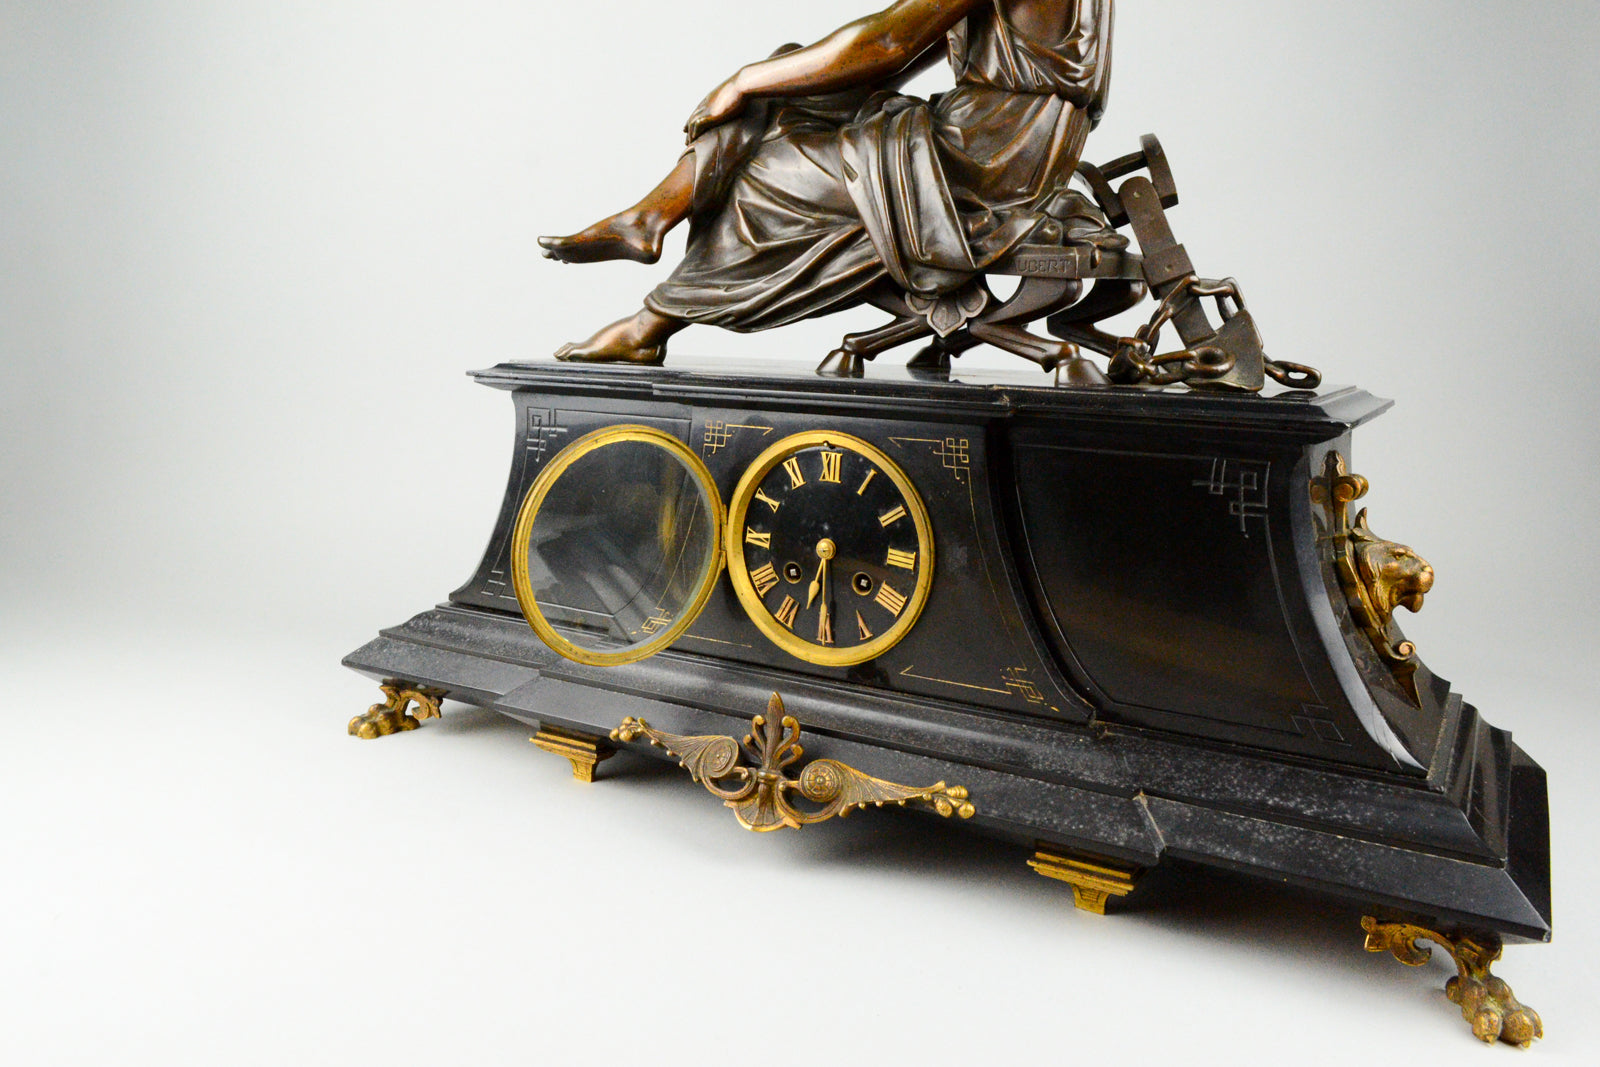 Antique French Clock with Bronze Figure of Virgile